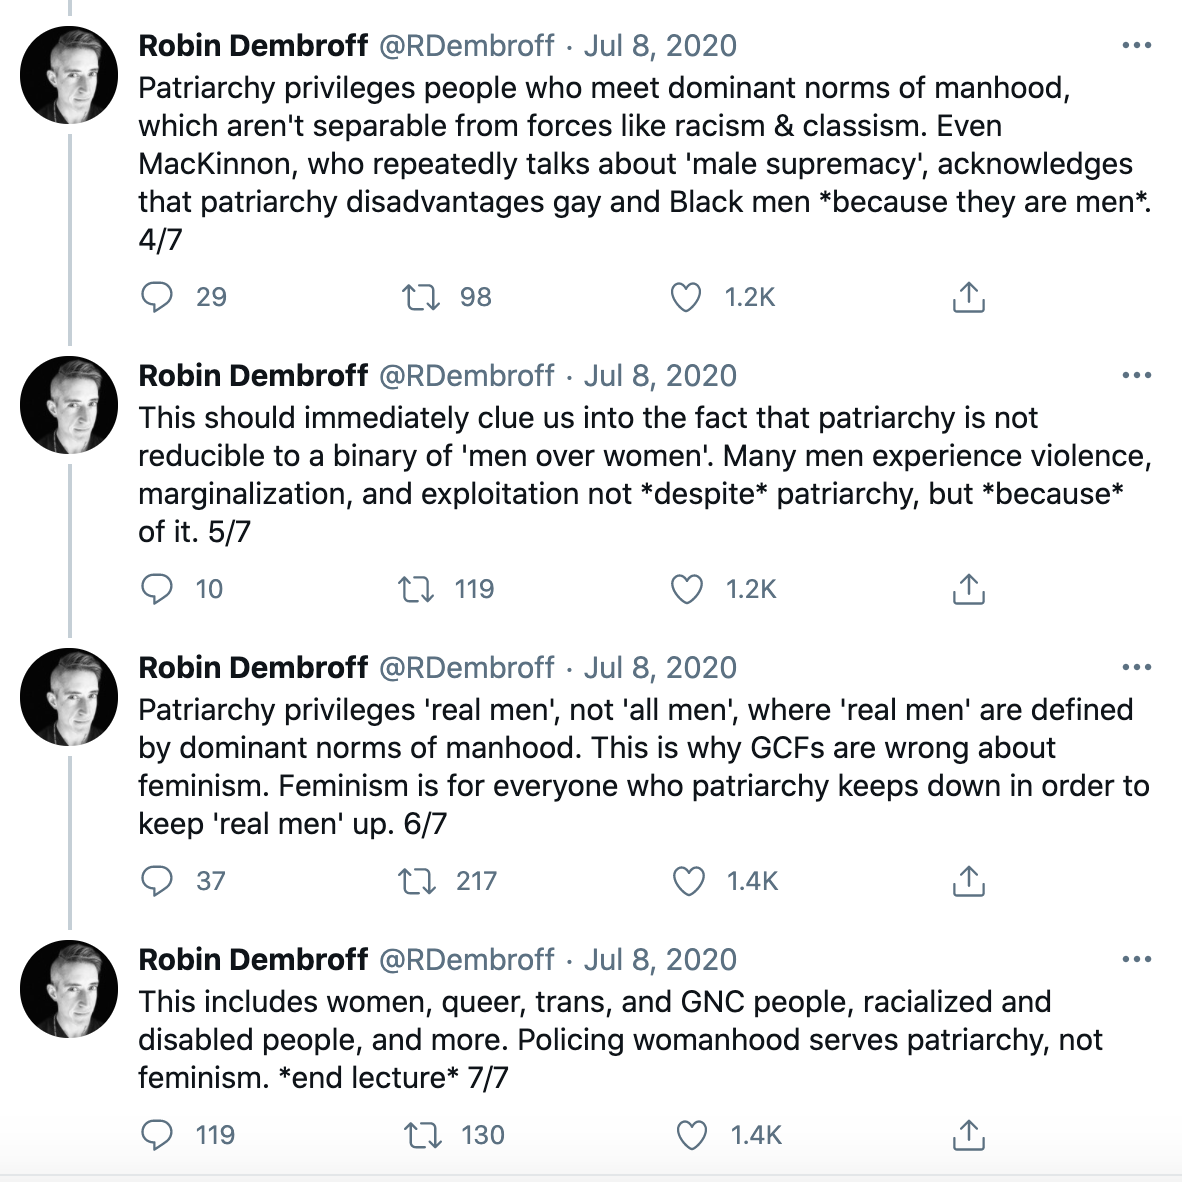 A Twitter thread by Robin Dembroff, Patriarchy privileges people who meet dominants norms of manhood, which aren't separable from forces like racism and classism. Even MacKinnon, who repeatedly talks about male supremacy, acknowledges that patriarchy disadvantages gay and Black men because they are men. This should immediately clue us into the fact that patriarchy is not reducible to a binary of men over women. Many men experience violence, marginalization, and exploitation not despite patriarchy, but because of it. Patriarchy privileges real men, not all men, where real men are defined by dominant norms of manhood. This is why GCFs are wrong about feminism. Feminism is for everyone who patriarchy keeps down in order to keep real men up. This includes women, queer, trans, and GNC people, and more. Policing womanhood serves patriarchy, not feminism. end lecture.